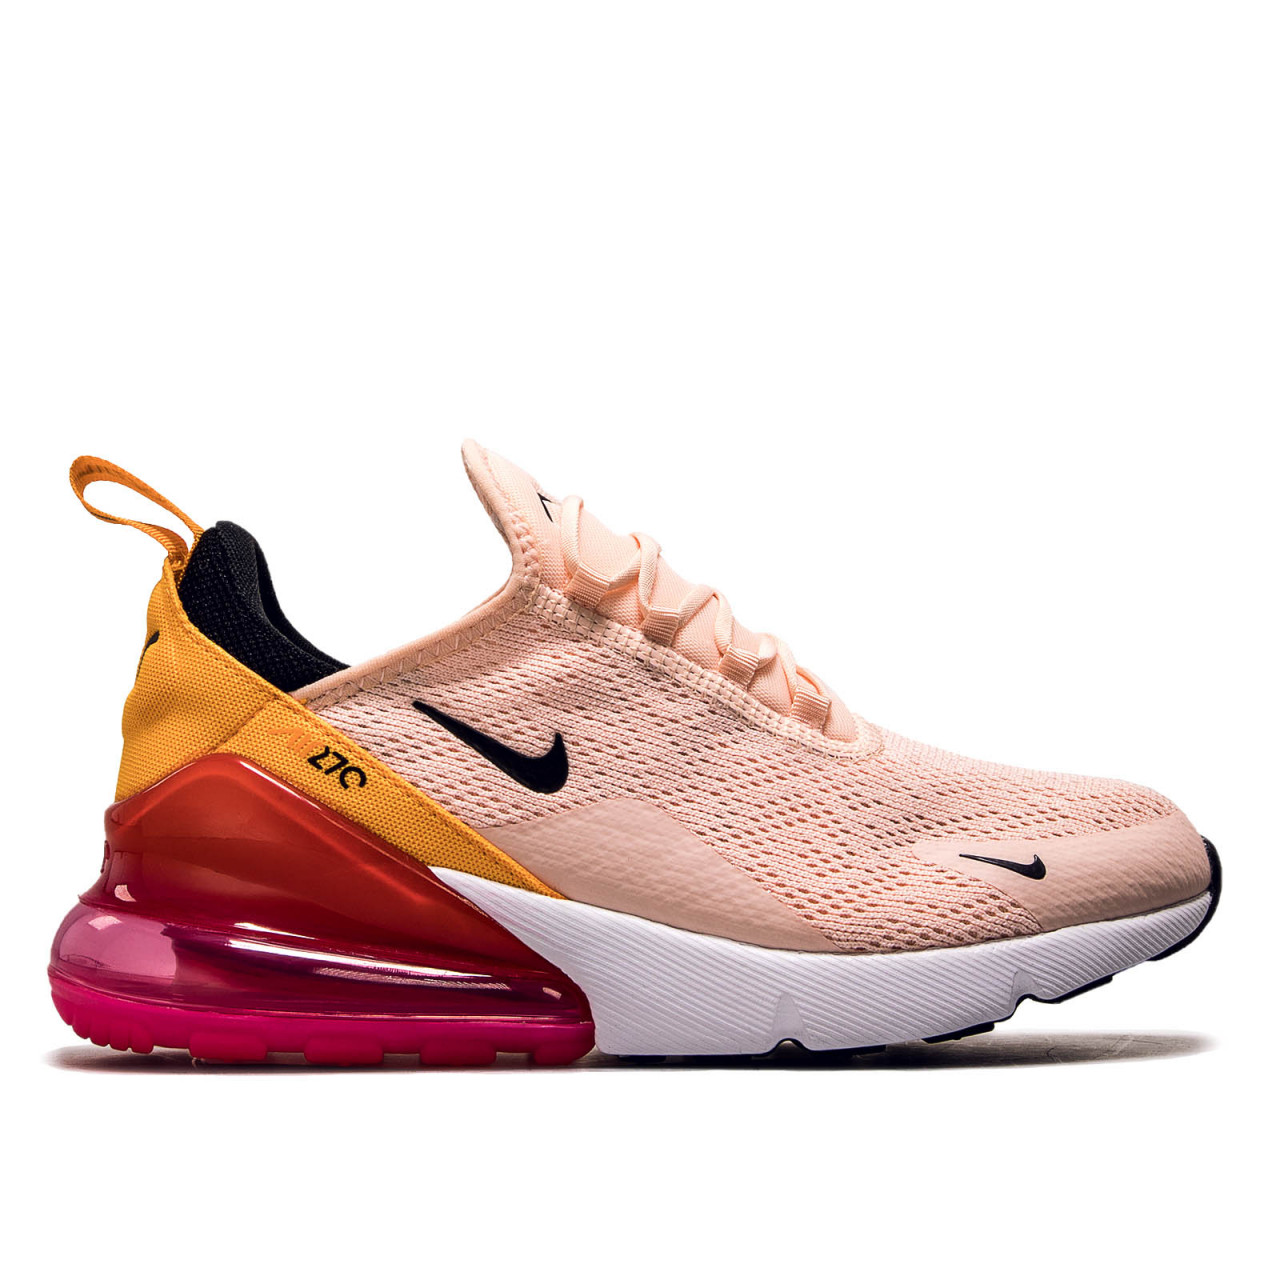 Damen Sneaker Air Max 270 Washed Coral Pink